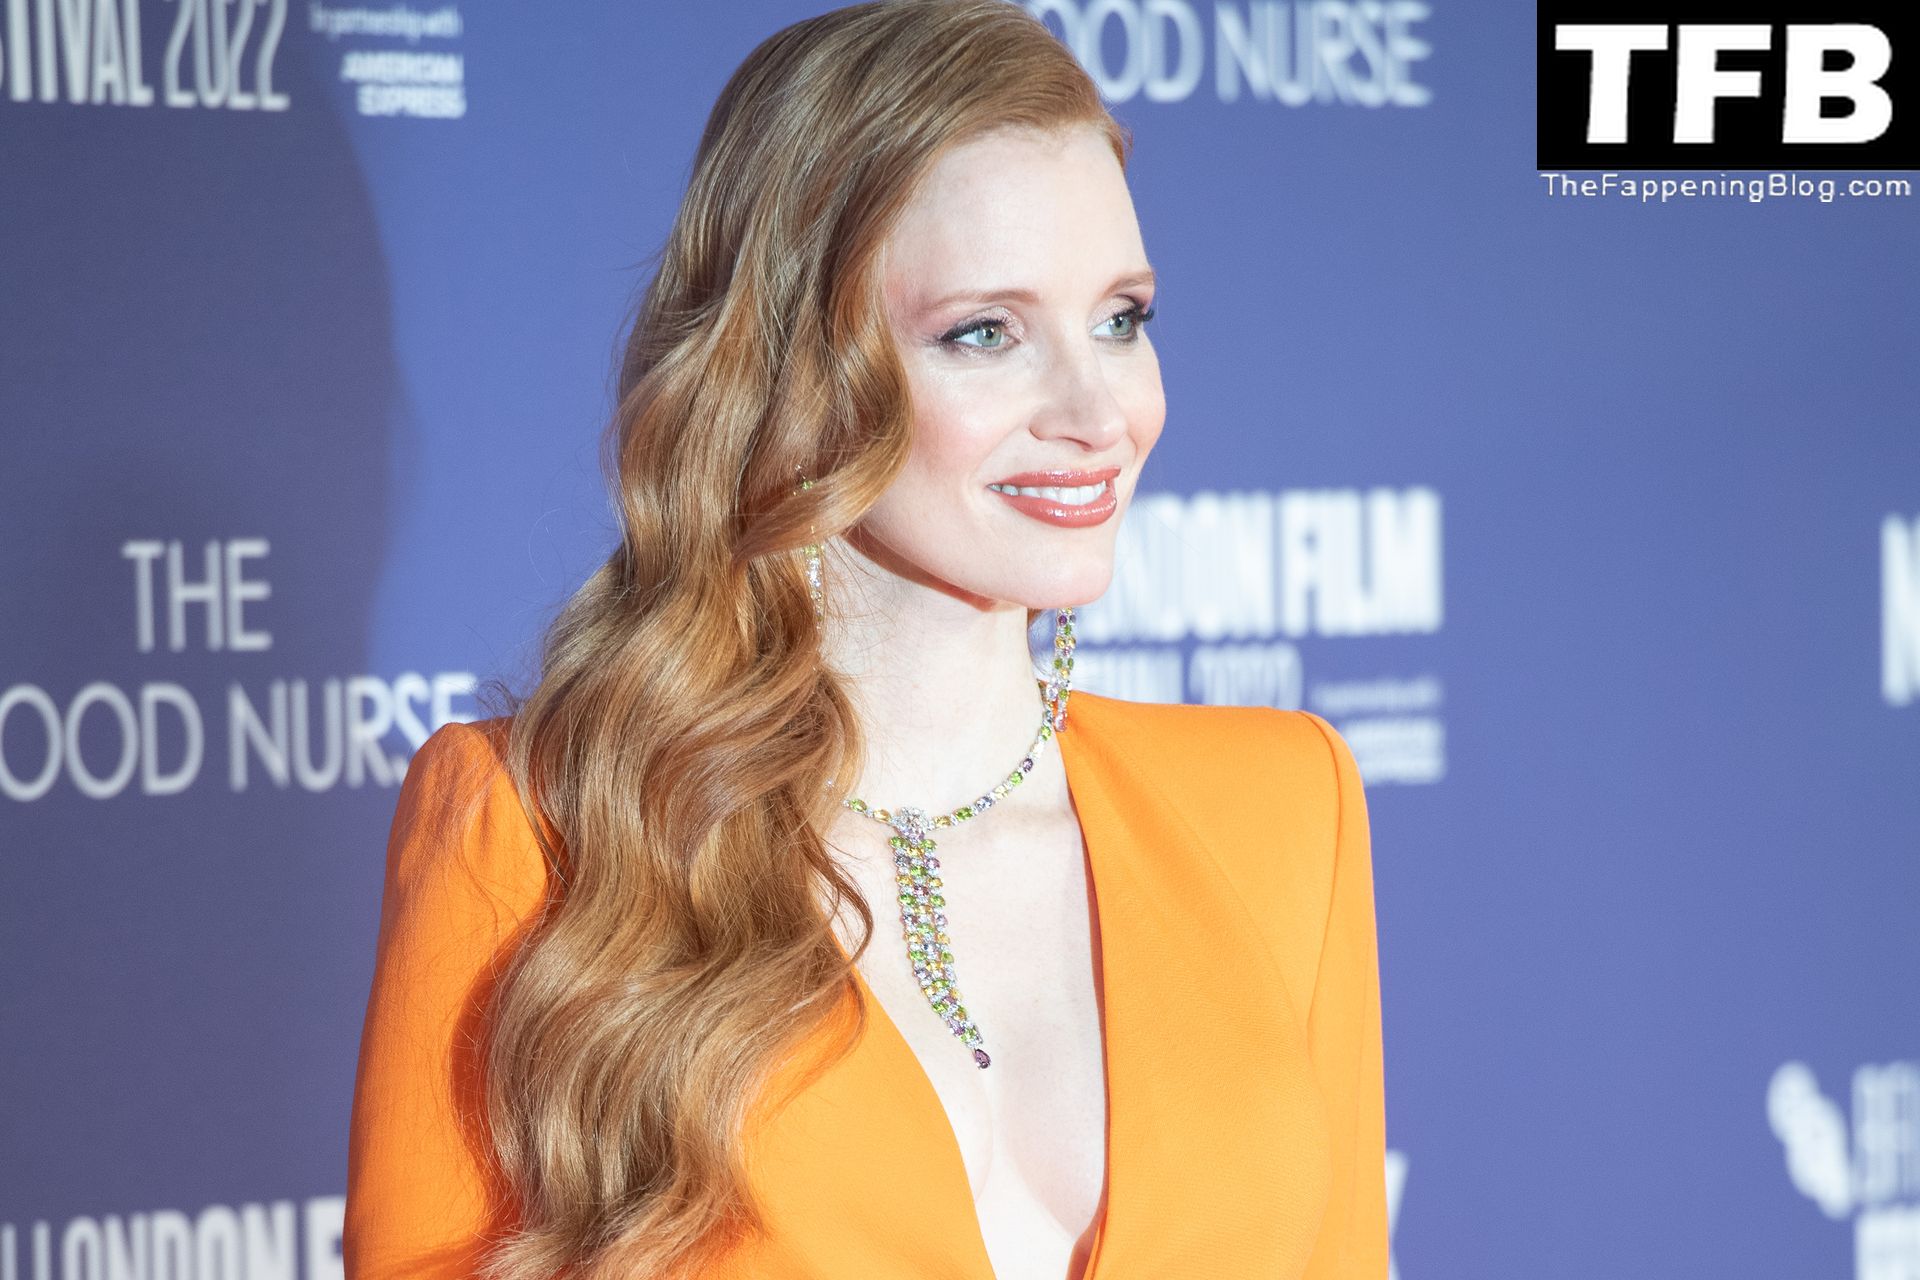 Jessica Chastain Sexy The Fappening Blog 93 - Jessica Chastain Poses for Photographers Upon Arrival for the Premiere of the Film “The Good Nurse” in London (150 Photos)